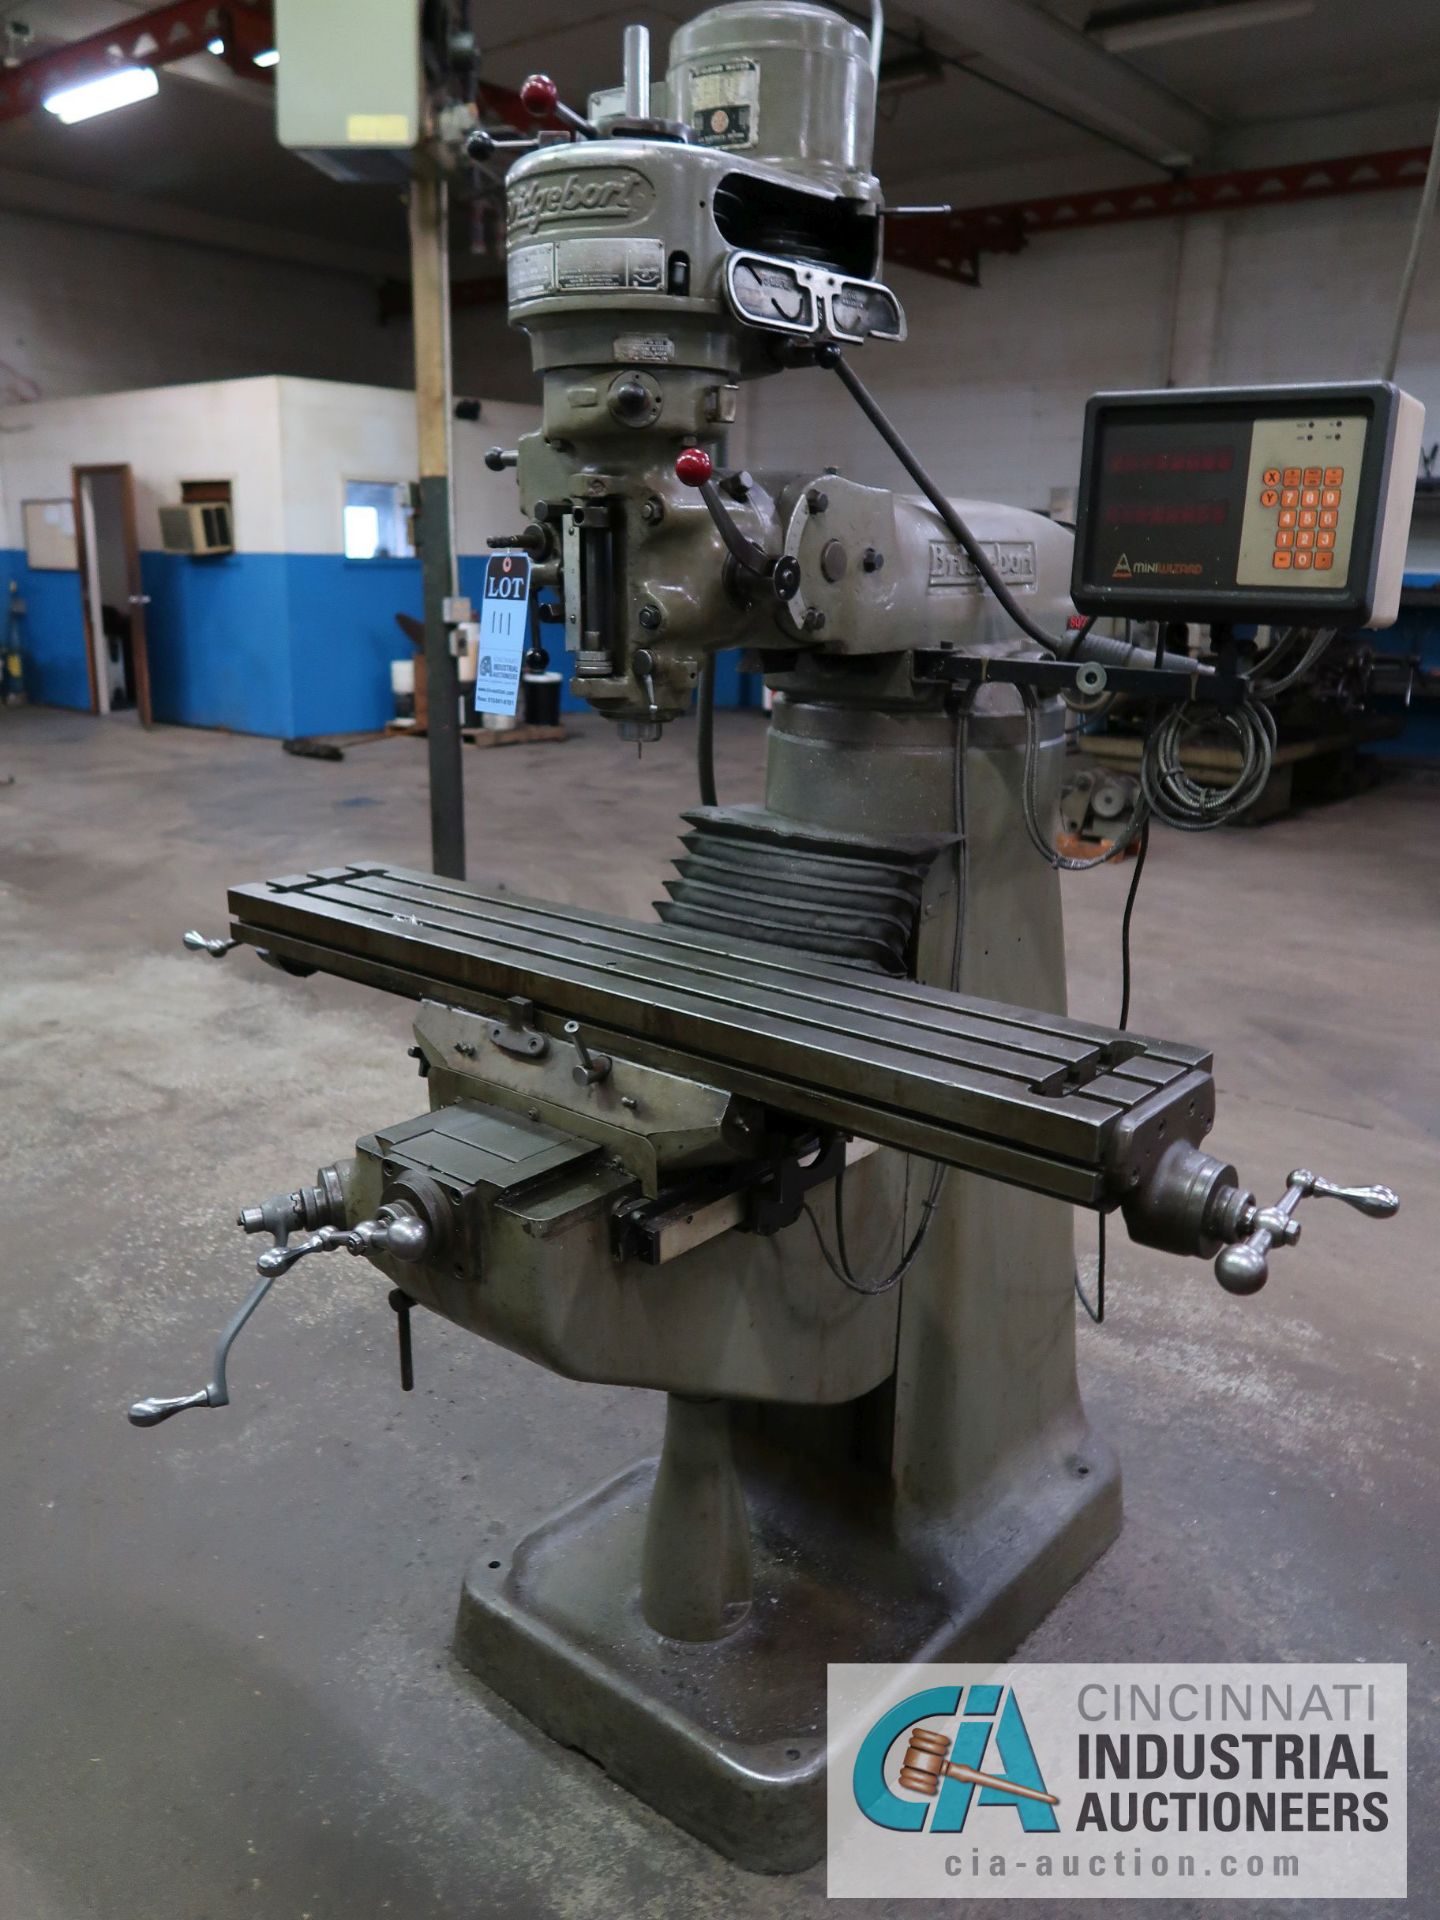 1-HP BRIDGEPORT 8-SPEED VERTICAL MILL; S/N J-74614, MINI WIZARD DRO, 48" X 9" TABLE, SPINDLE - Image 2 of 7